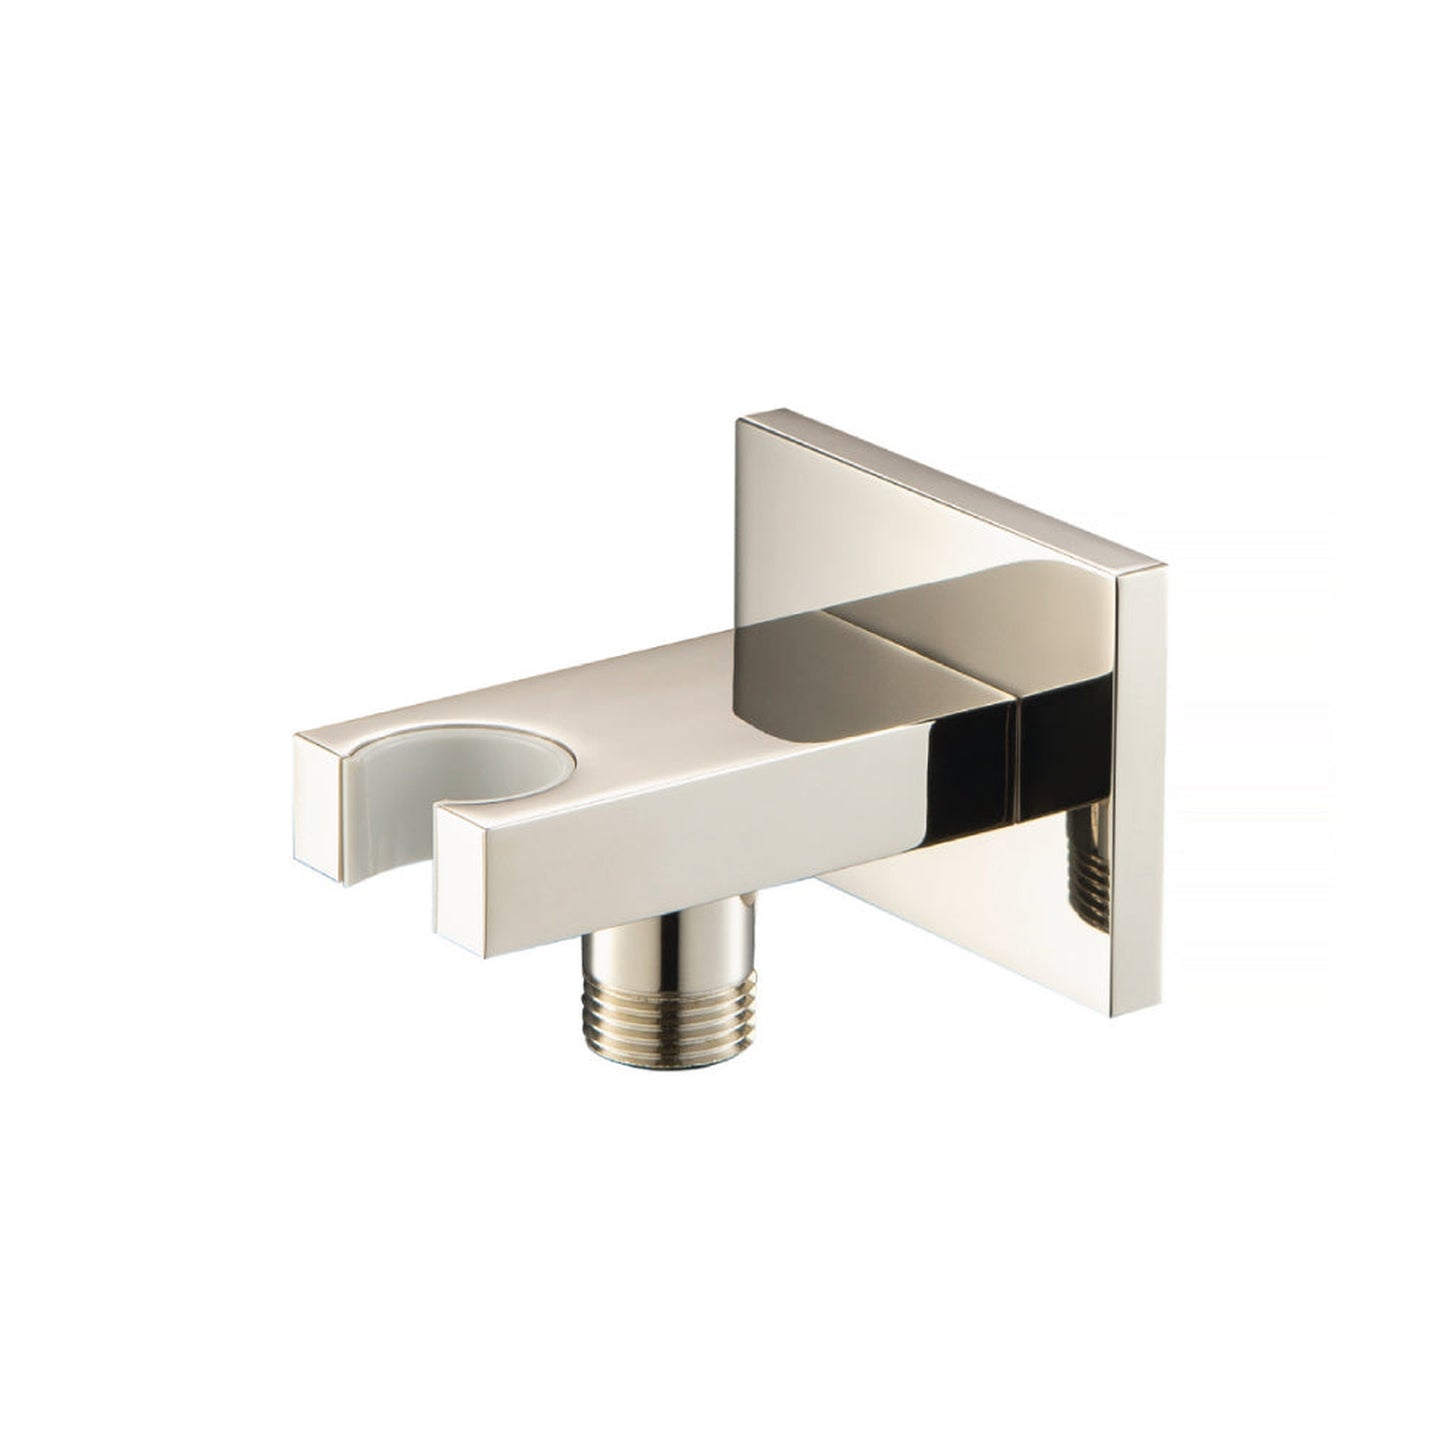 Isenberg Universal Fixtures Wall Elbow With Combo Holder in Polished Nickel (HS8006PN)